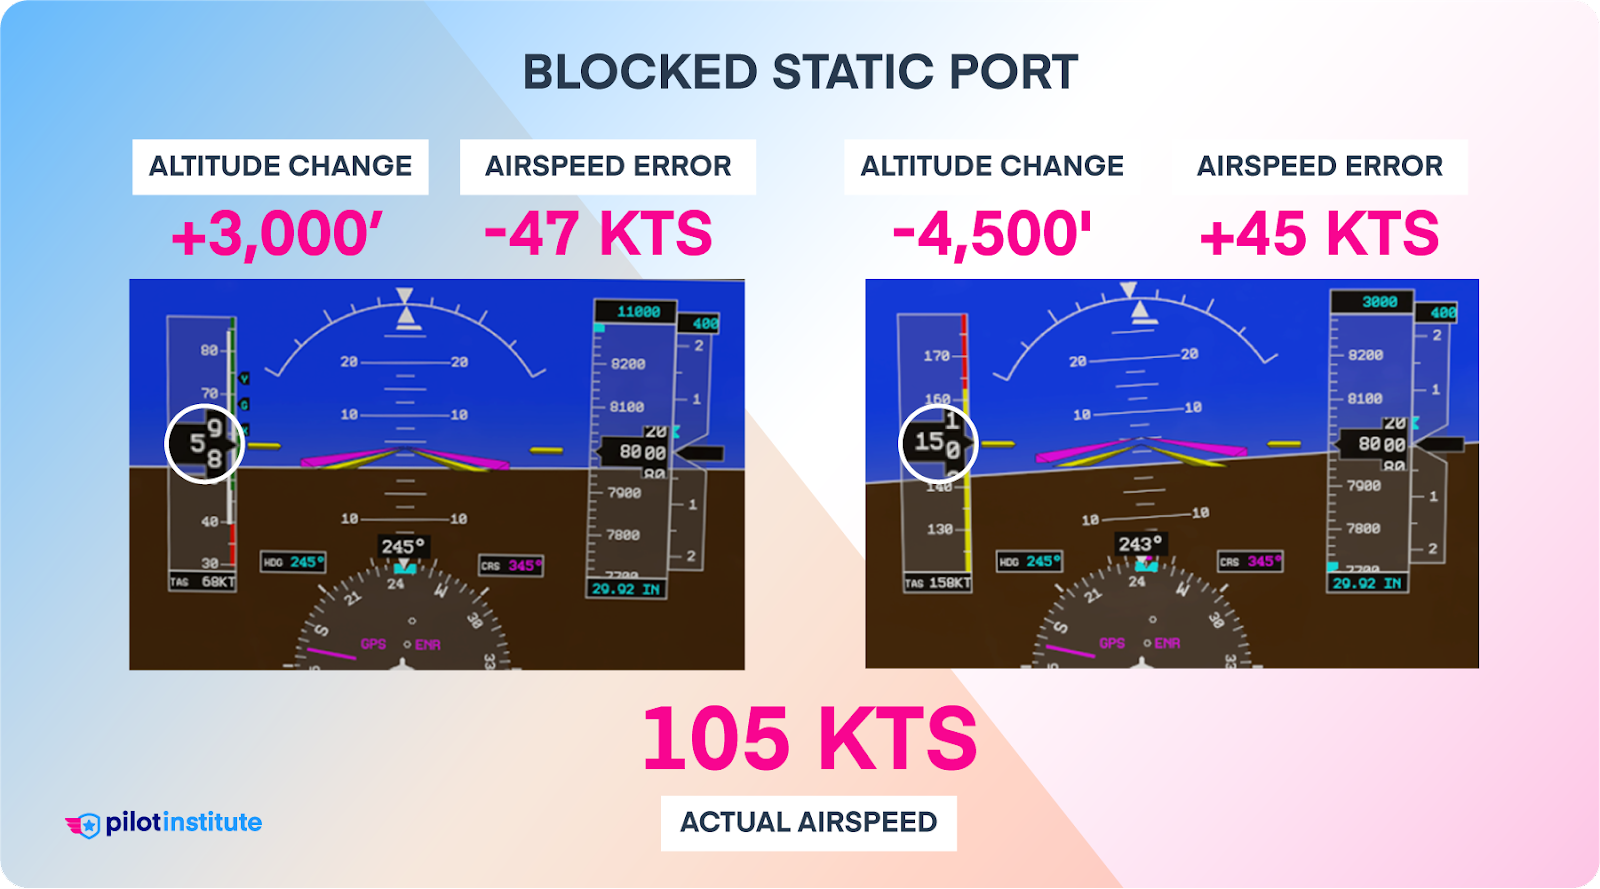 Infographic depicting how changes in altitude affect the ASI when the static port is blocked.